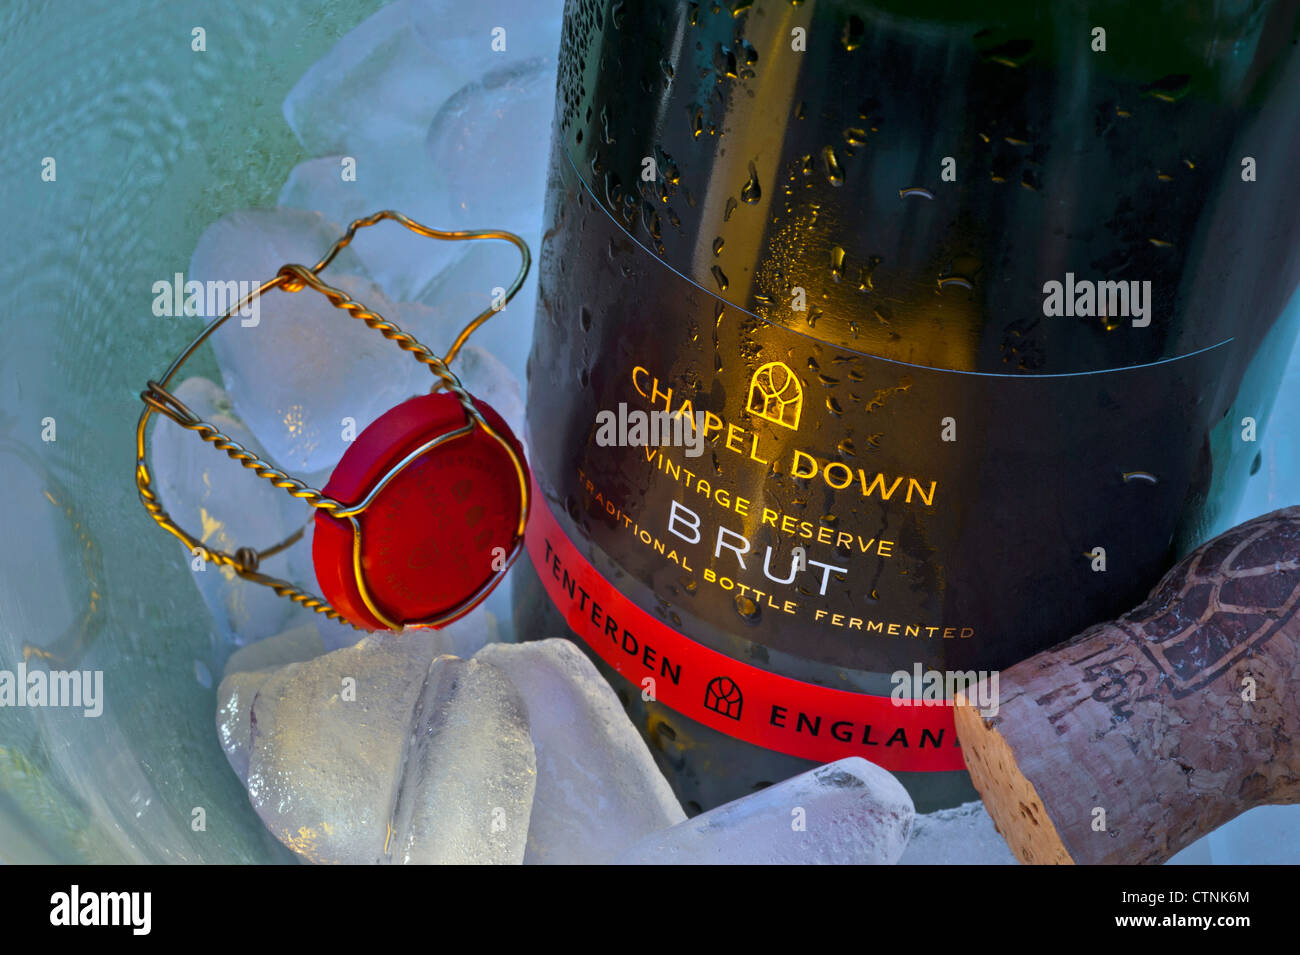 English sparkling wine 'Chapel Down Brut'  bottle on ice in wine cooler with cork and retaining cap Stock Photo